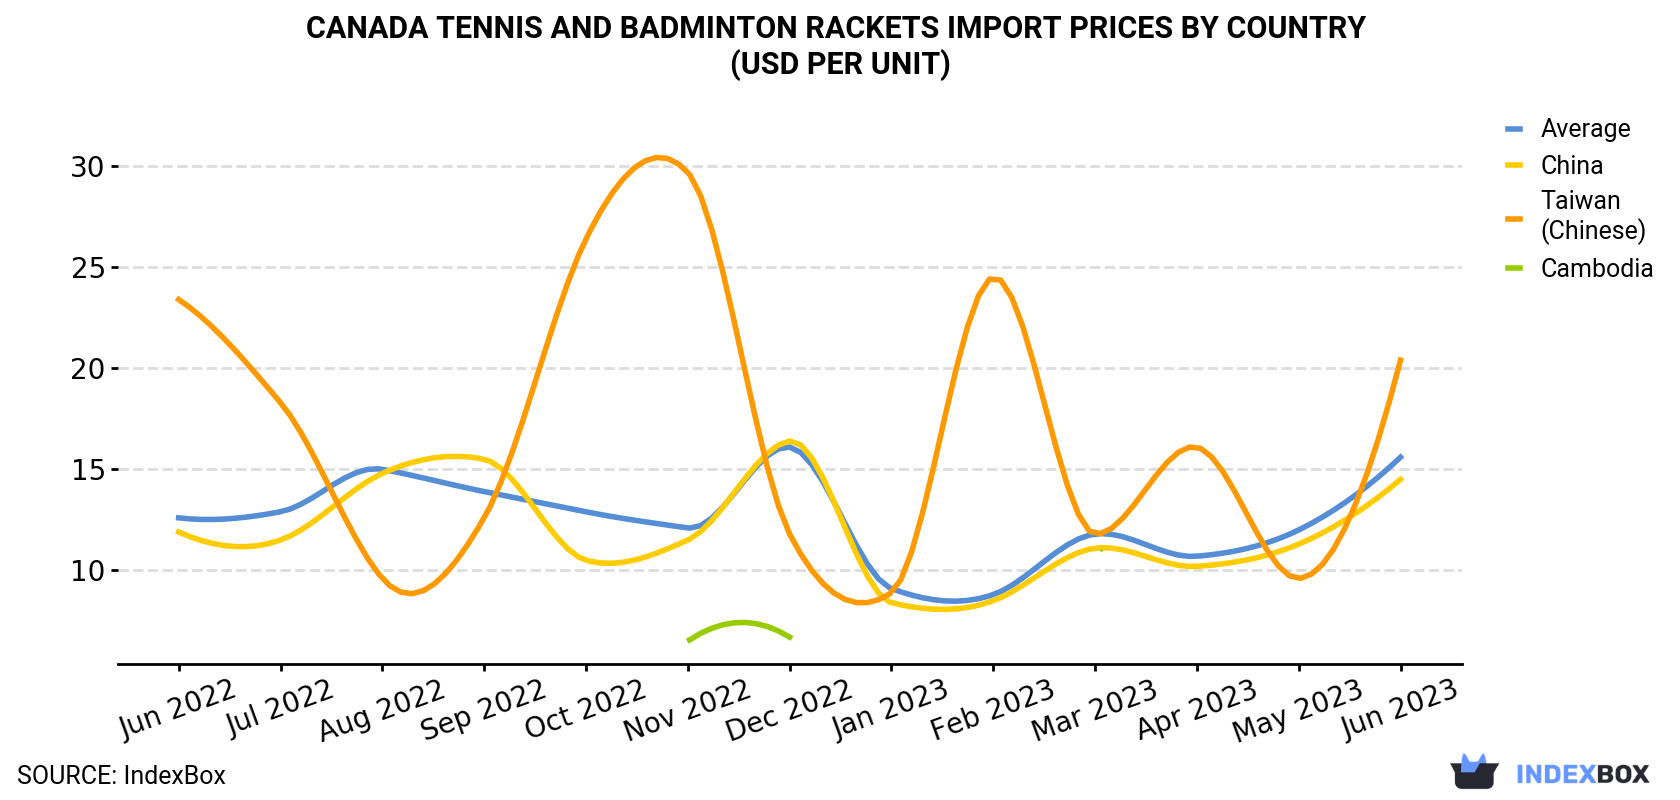 Canada Tennis And Badminton Rackets Import Prices By Country (USD Per Unit)